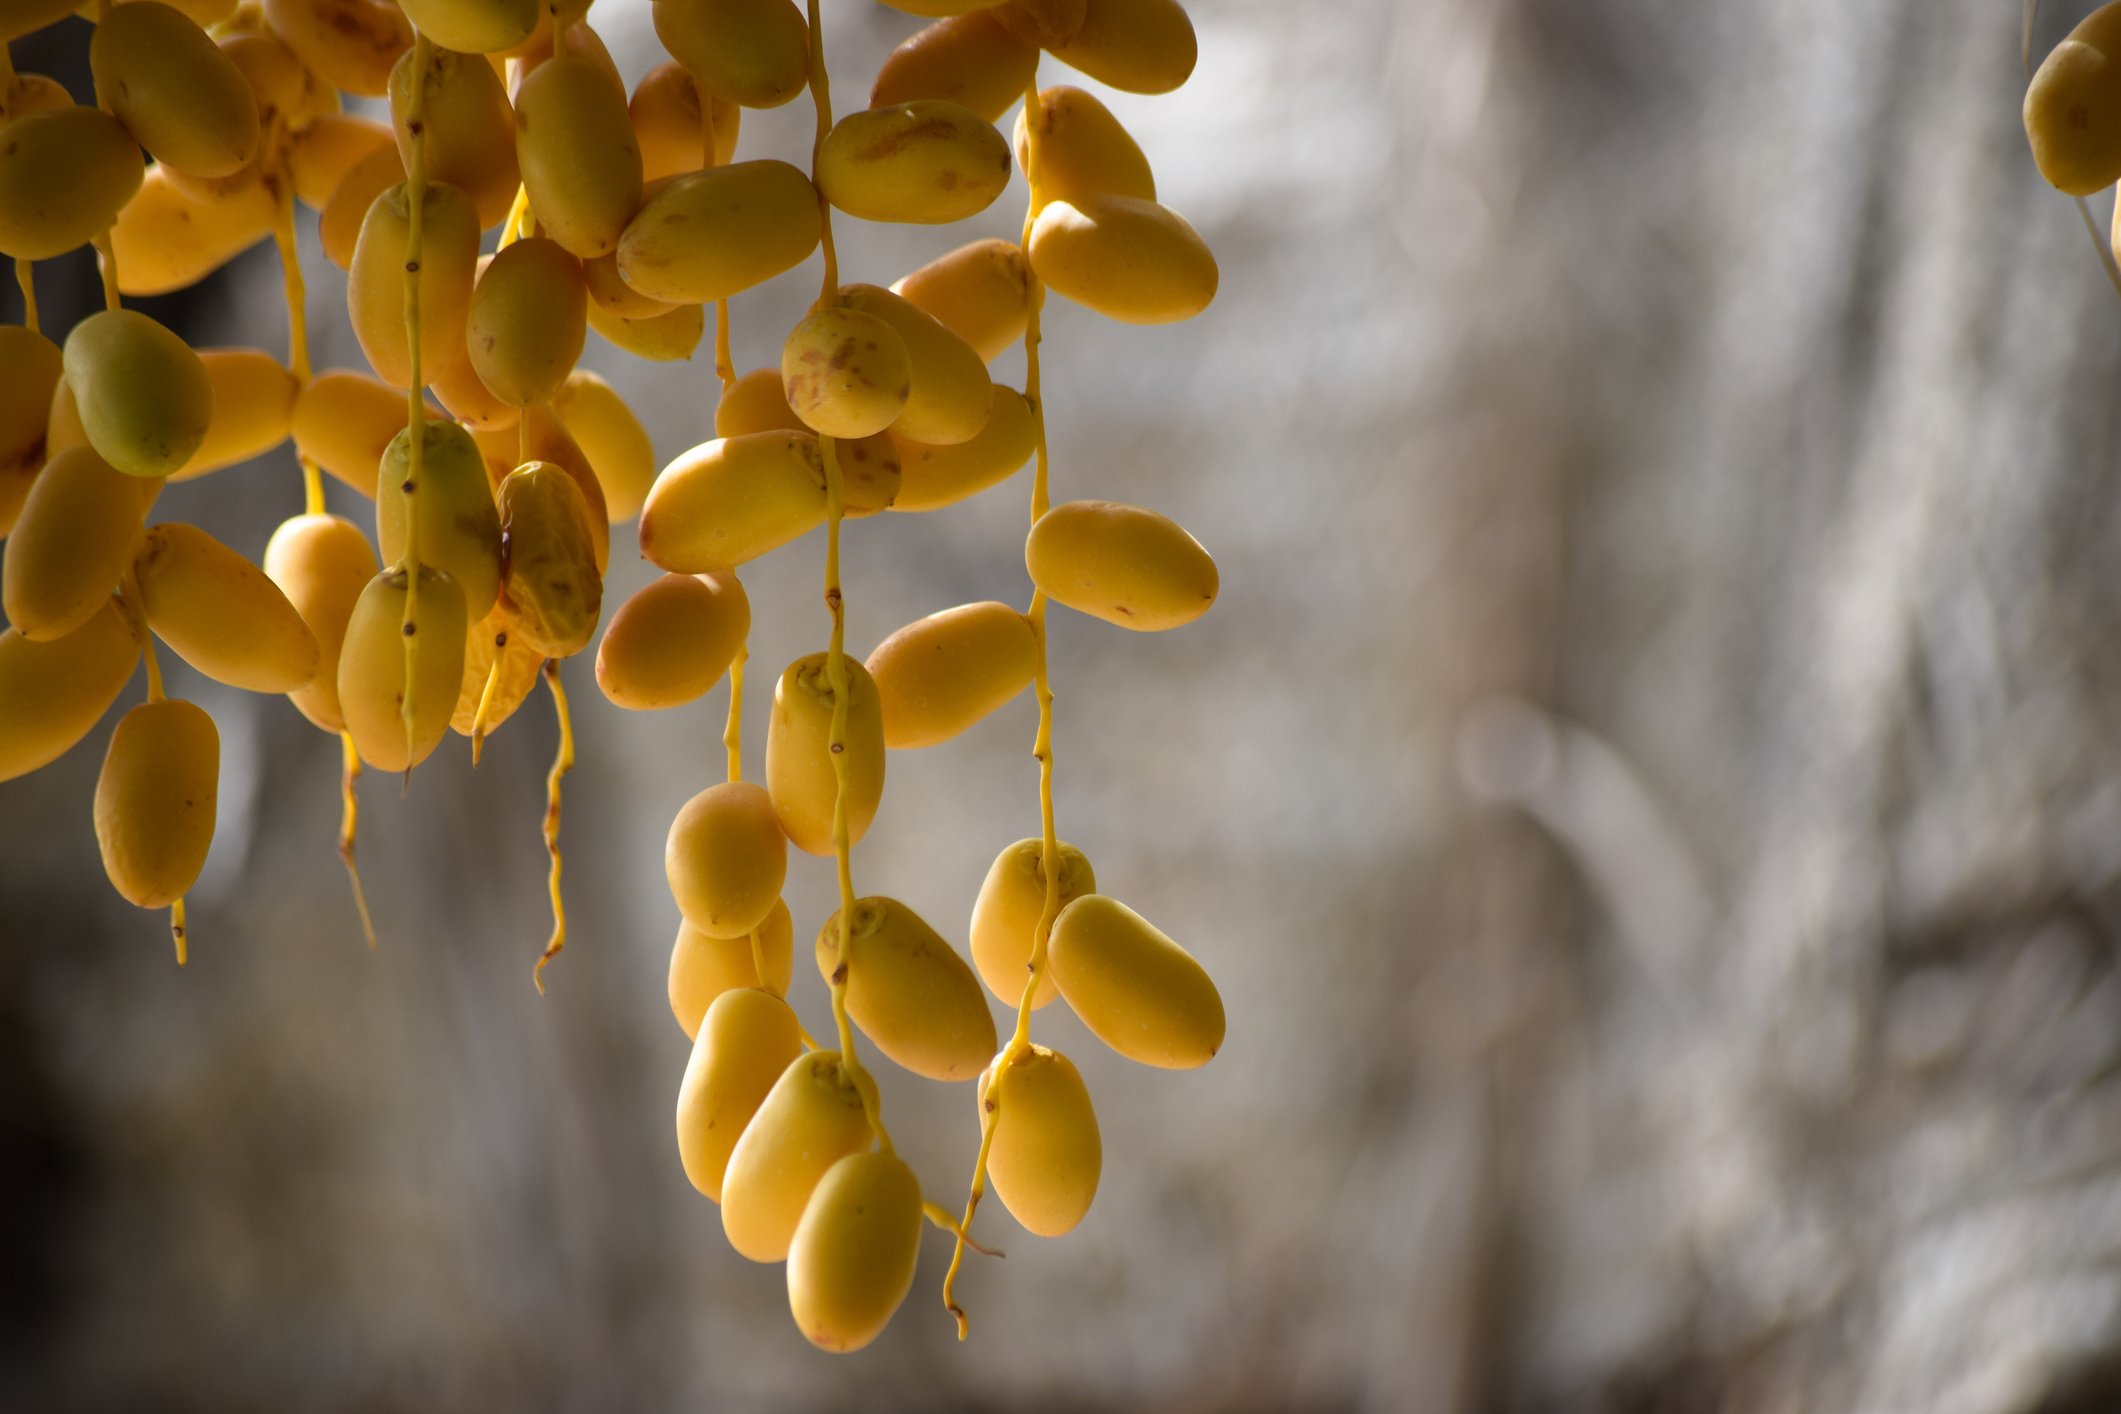 Fresh dates range in color from bright red to bright yellow. (iStock Photo)